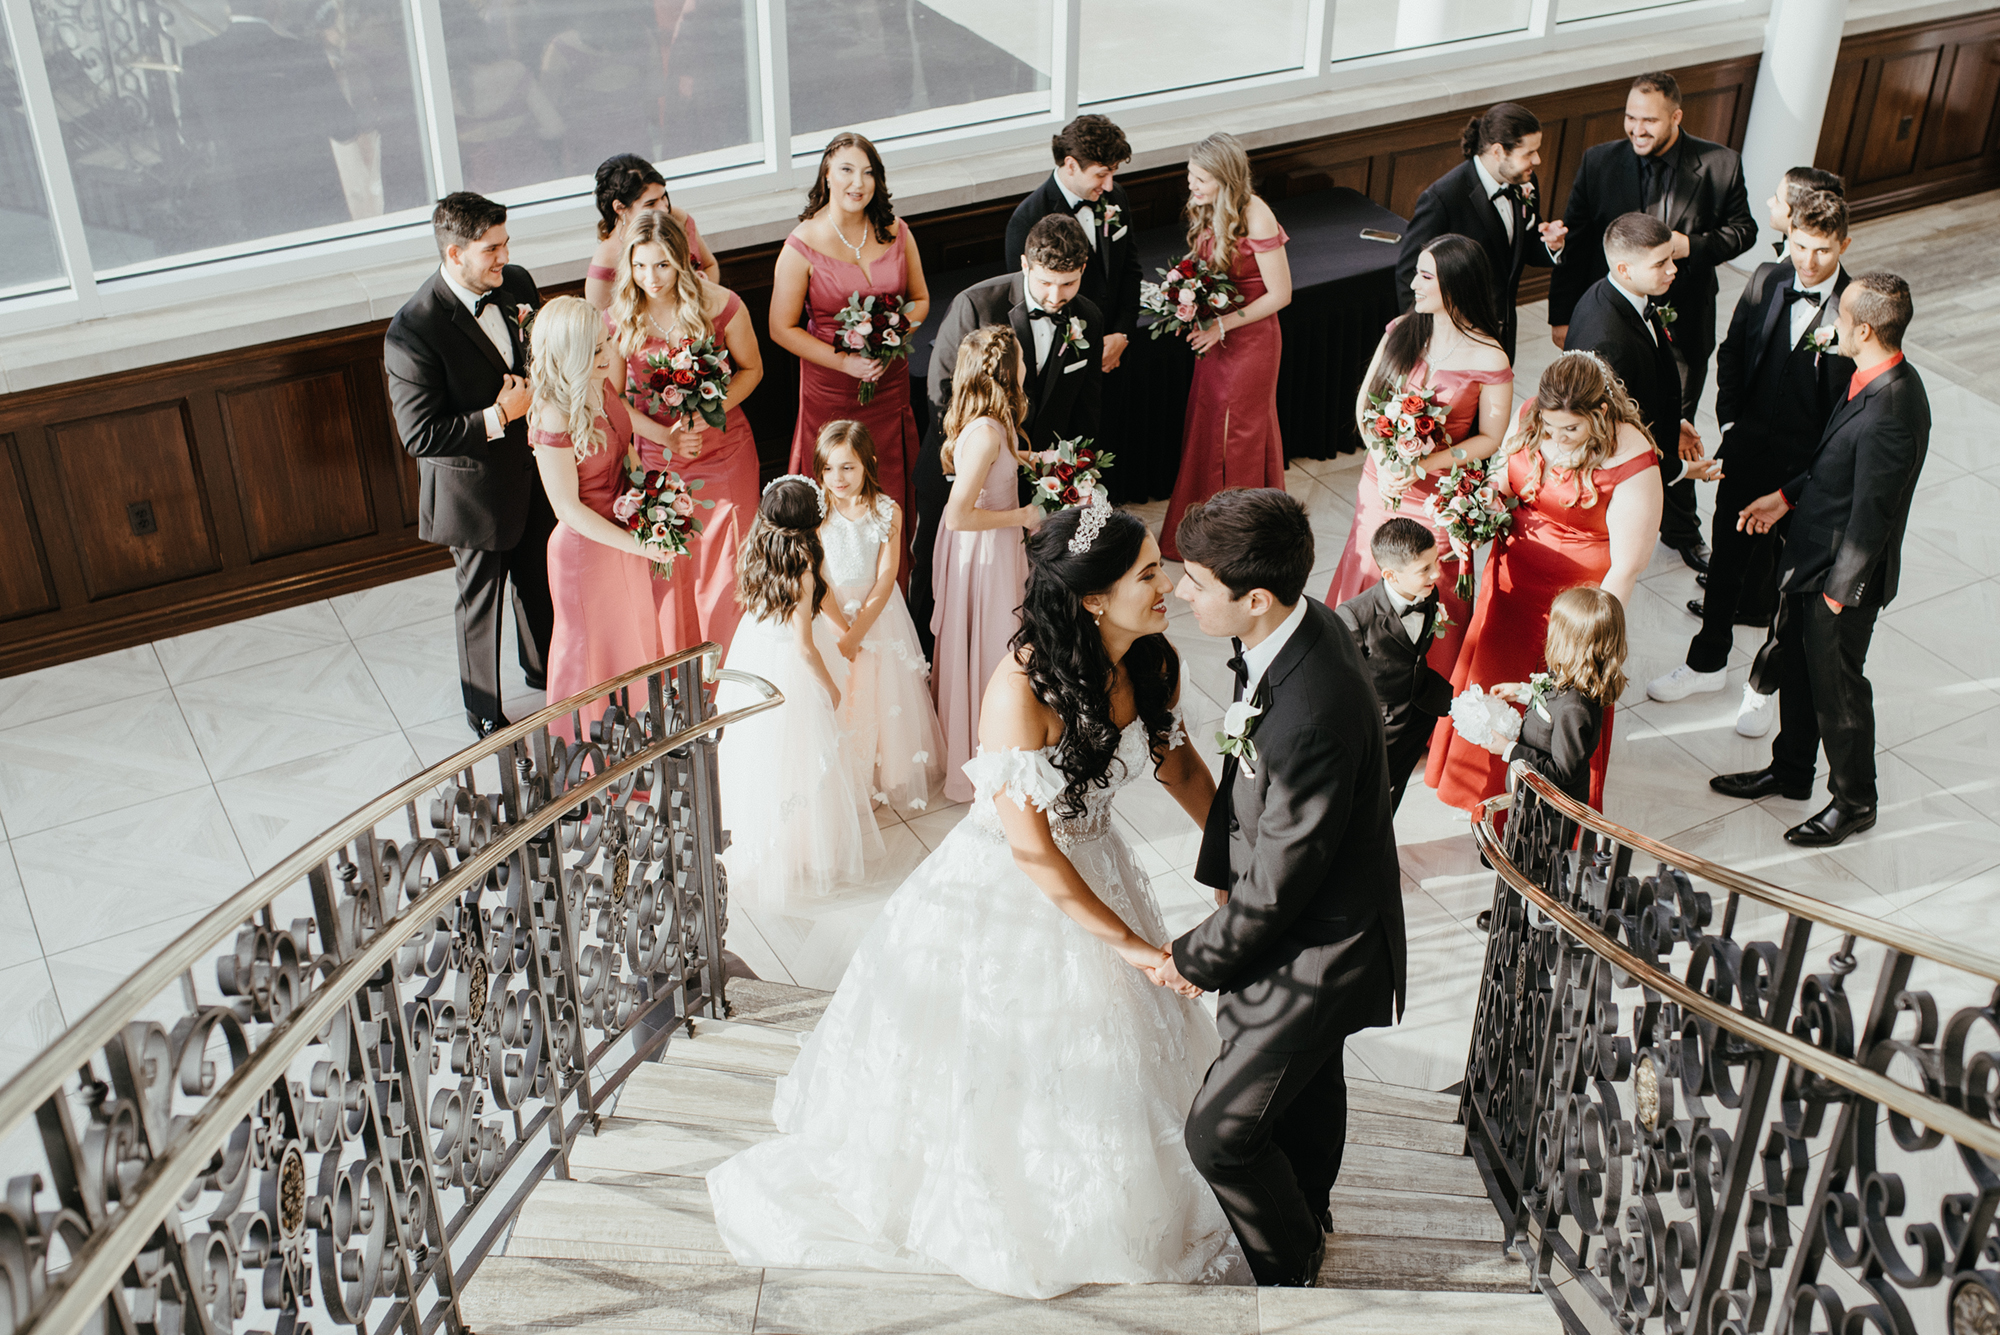 Wedding Party at the bottom of one of the dueling staircases leading to the Willows' Atrium.